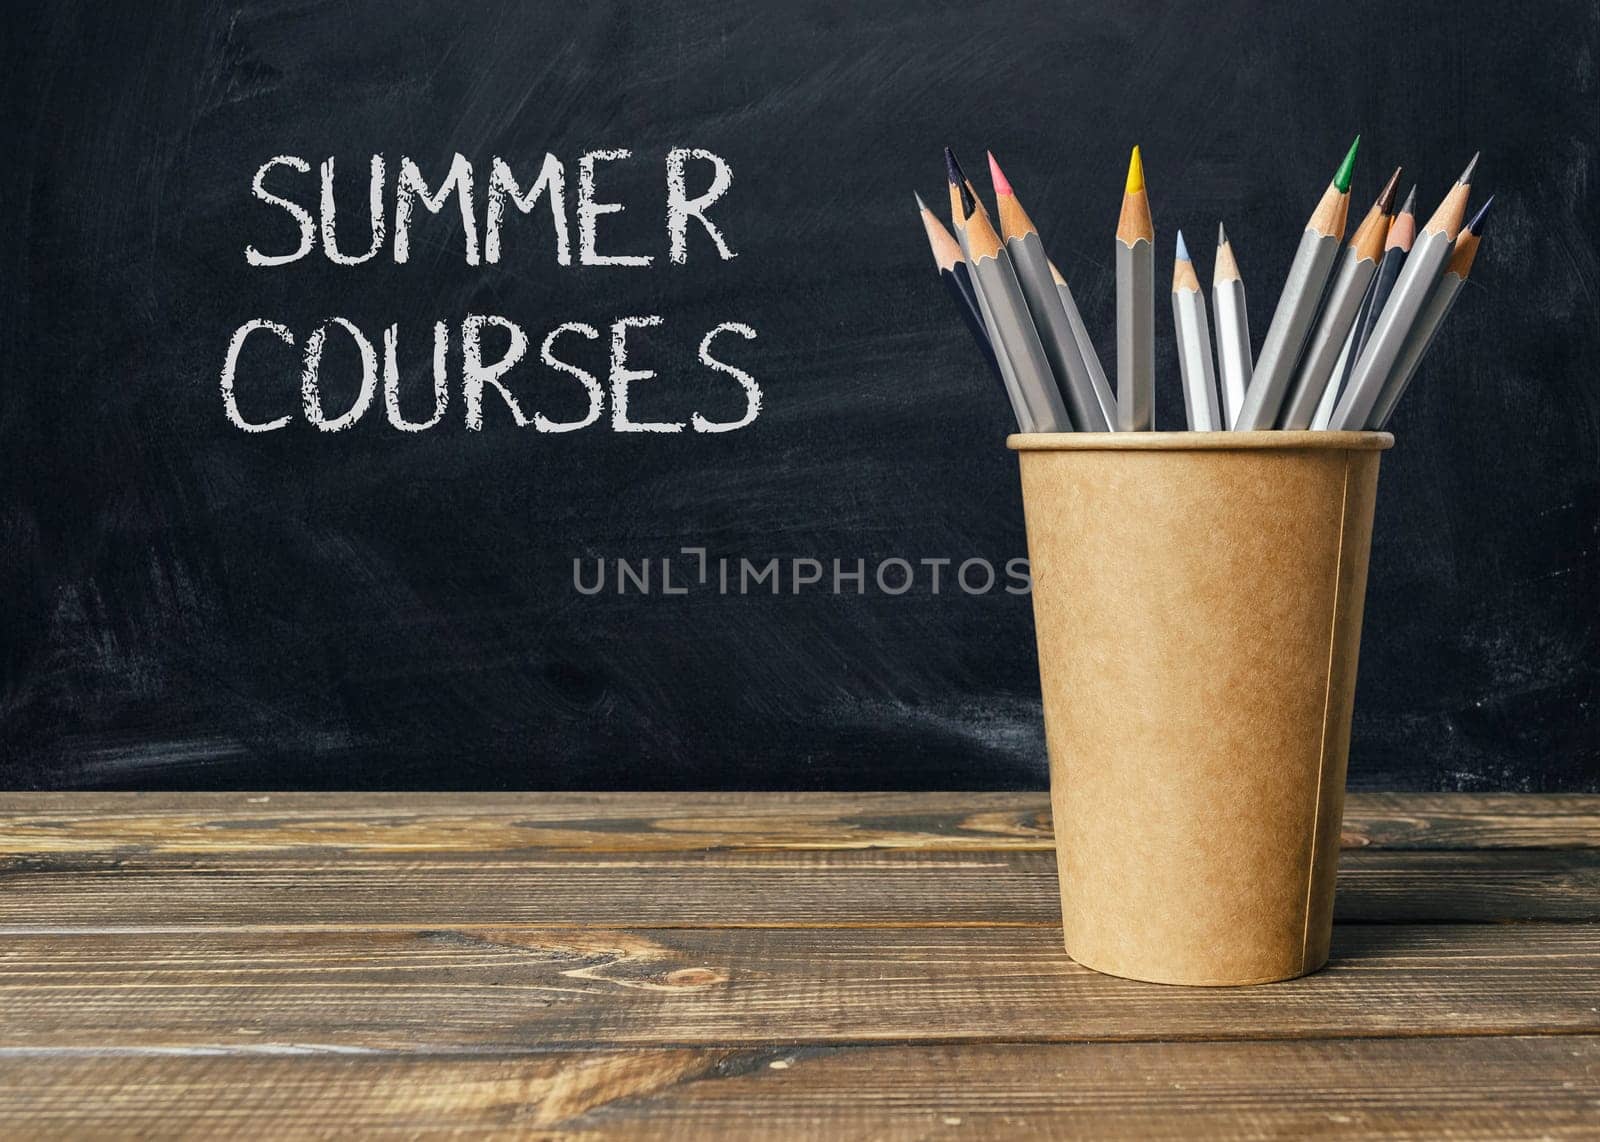 A wooden table with a cup of pencils and chalkboard with the words Summer Courses written on it